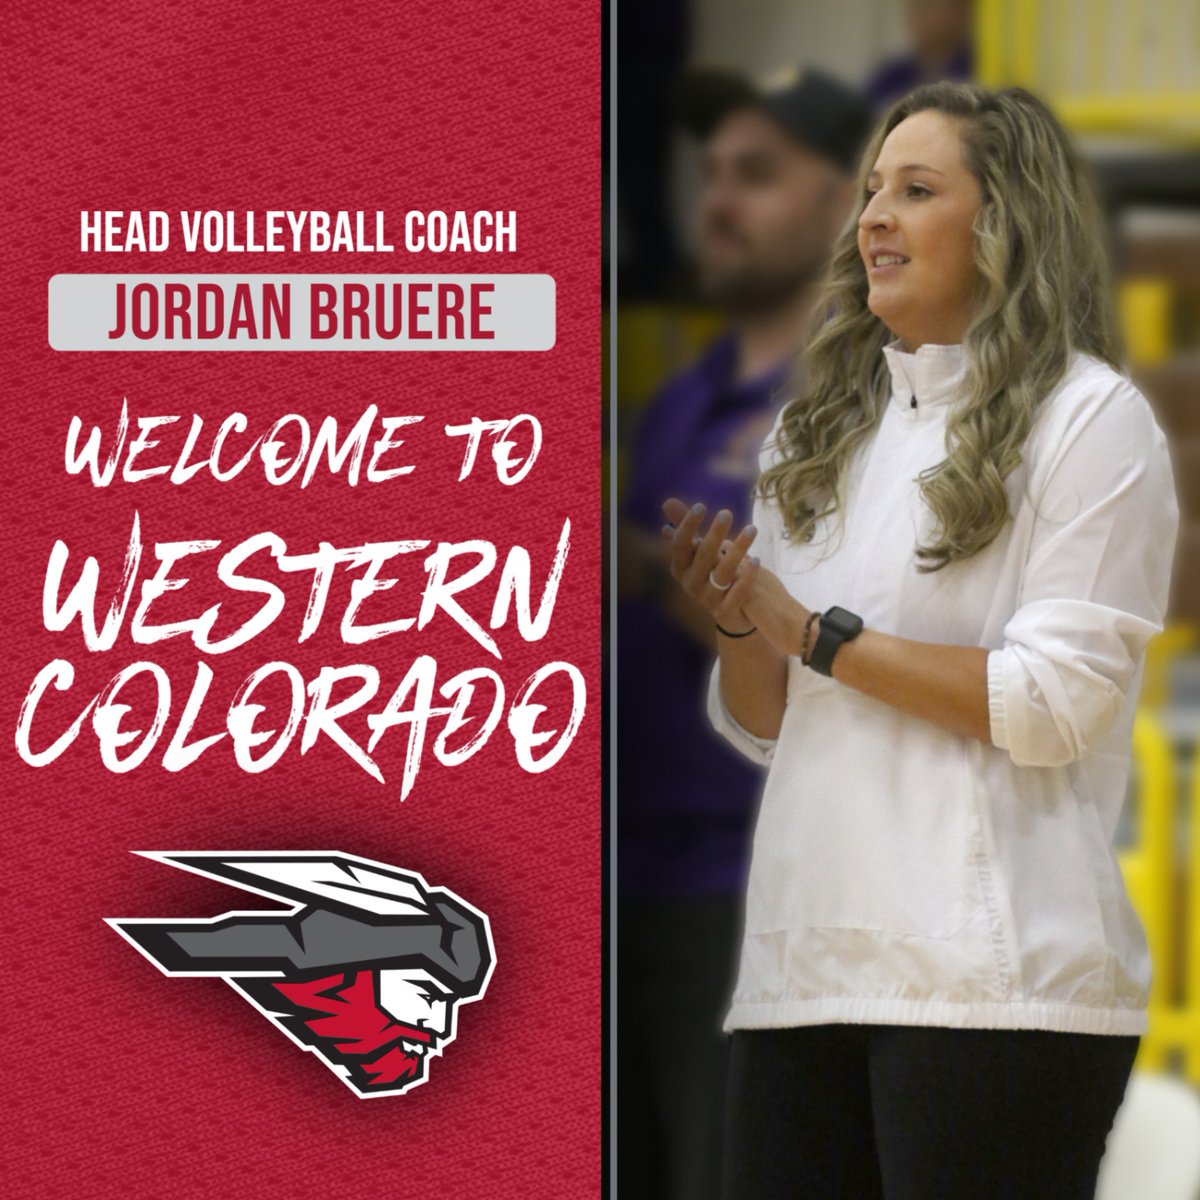 A new era for Mountaineer volleyball begins! @MountaineerVB #ExcellenceElevated #7723ft